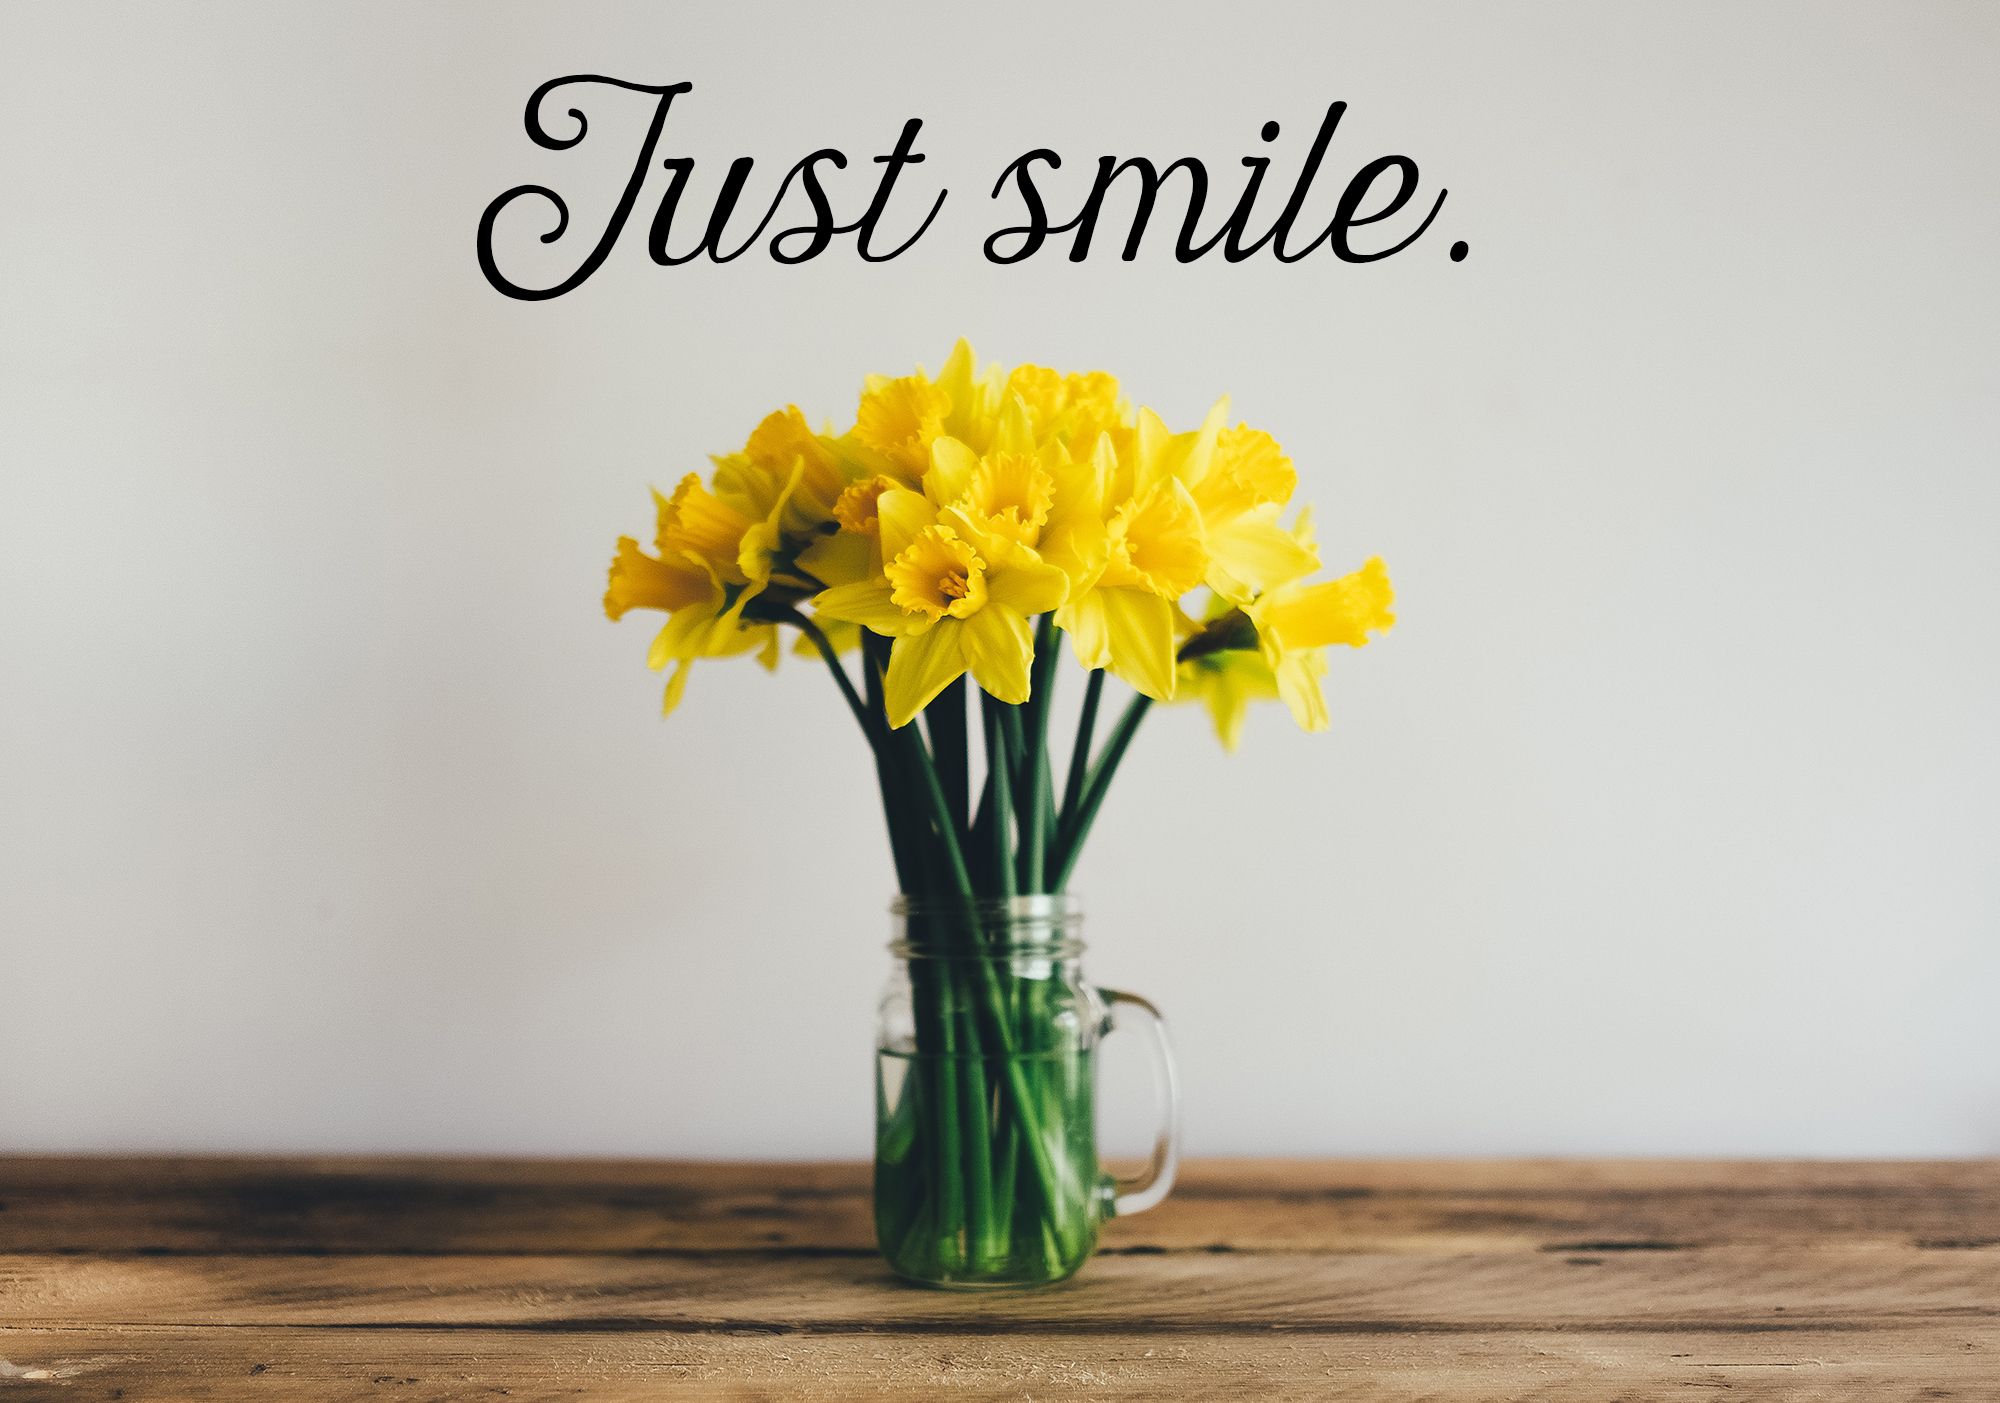 115 Smile Quotes to Brighten Your Day  LoveToKnow